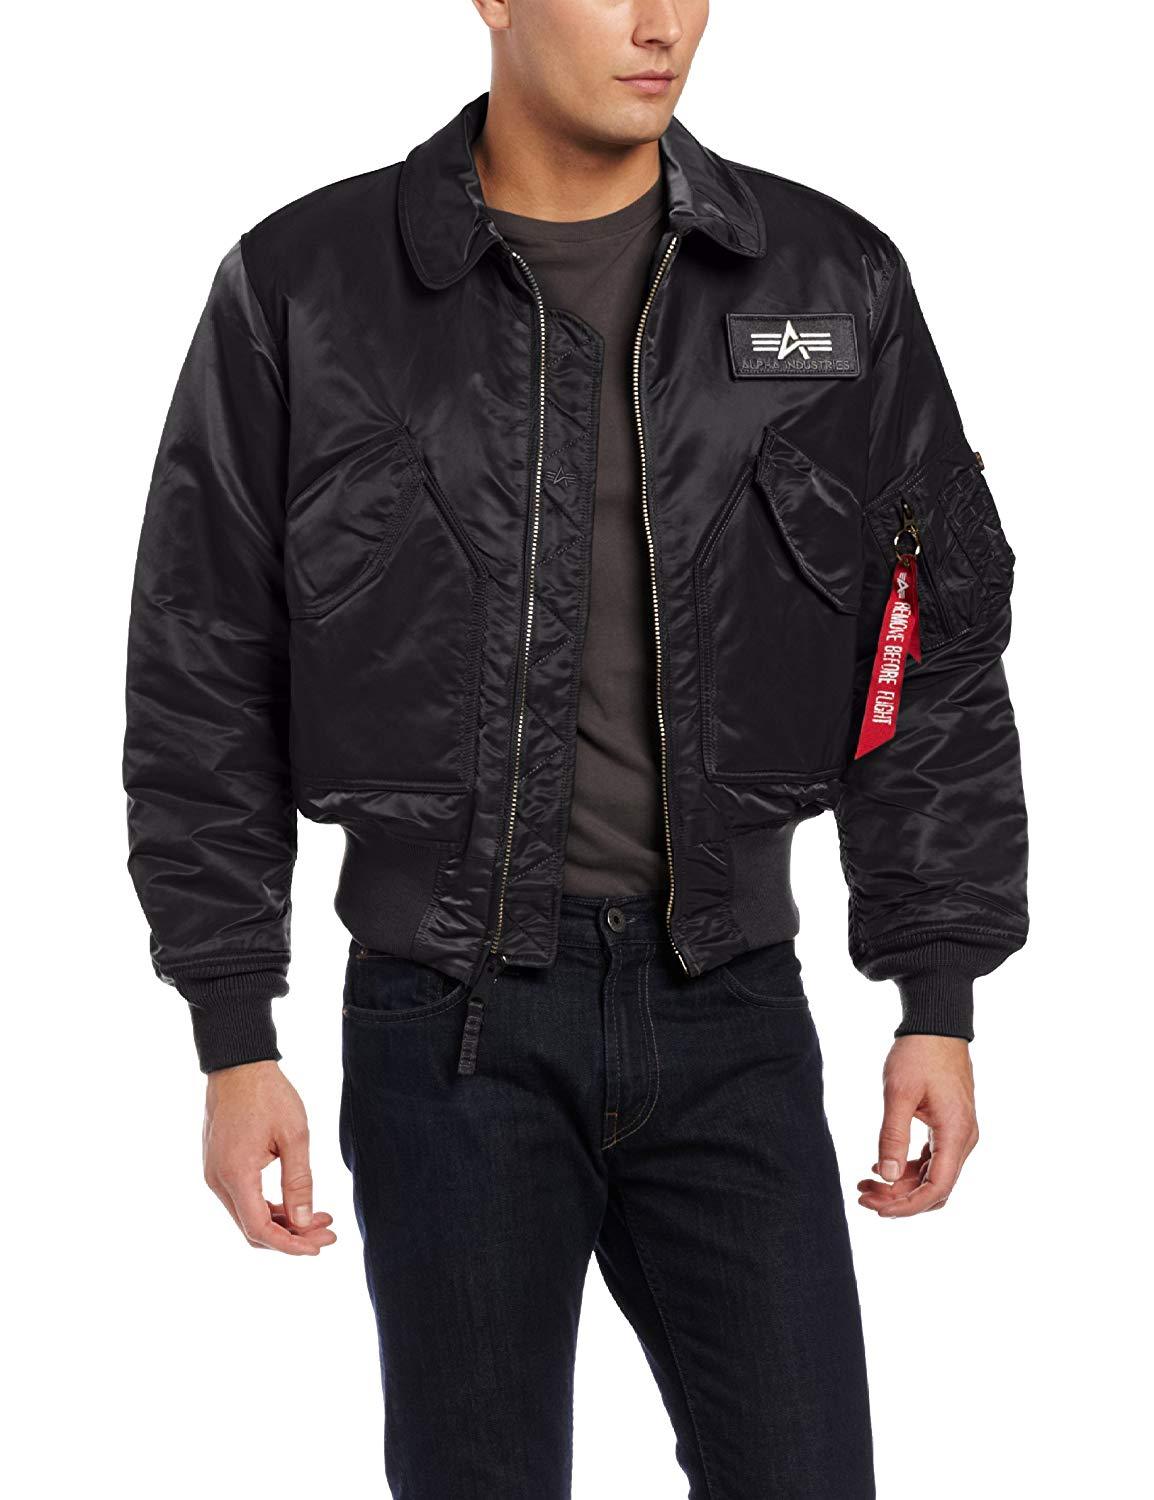 Cwu 45 Alpha Industries Buy Now Store 58 Off Www Ecoventuno It